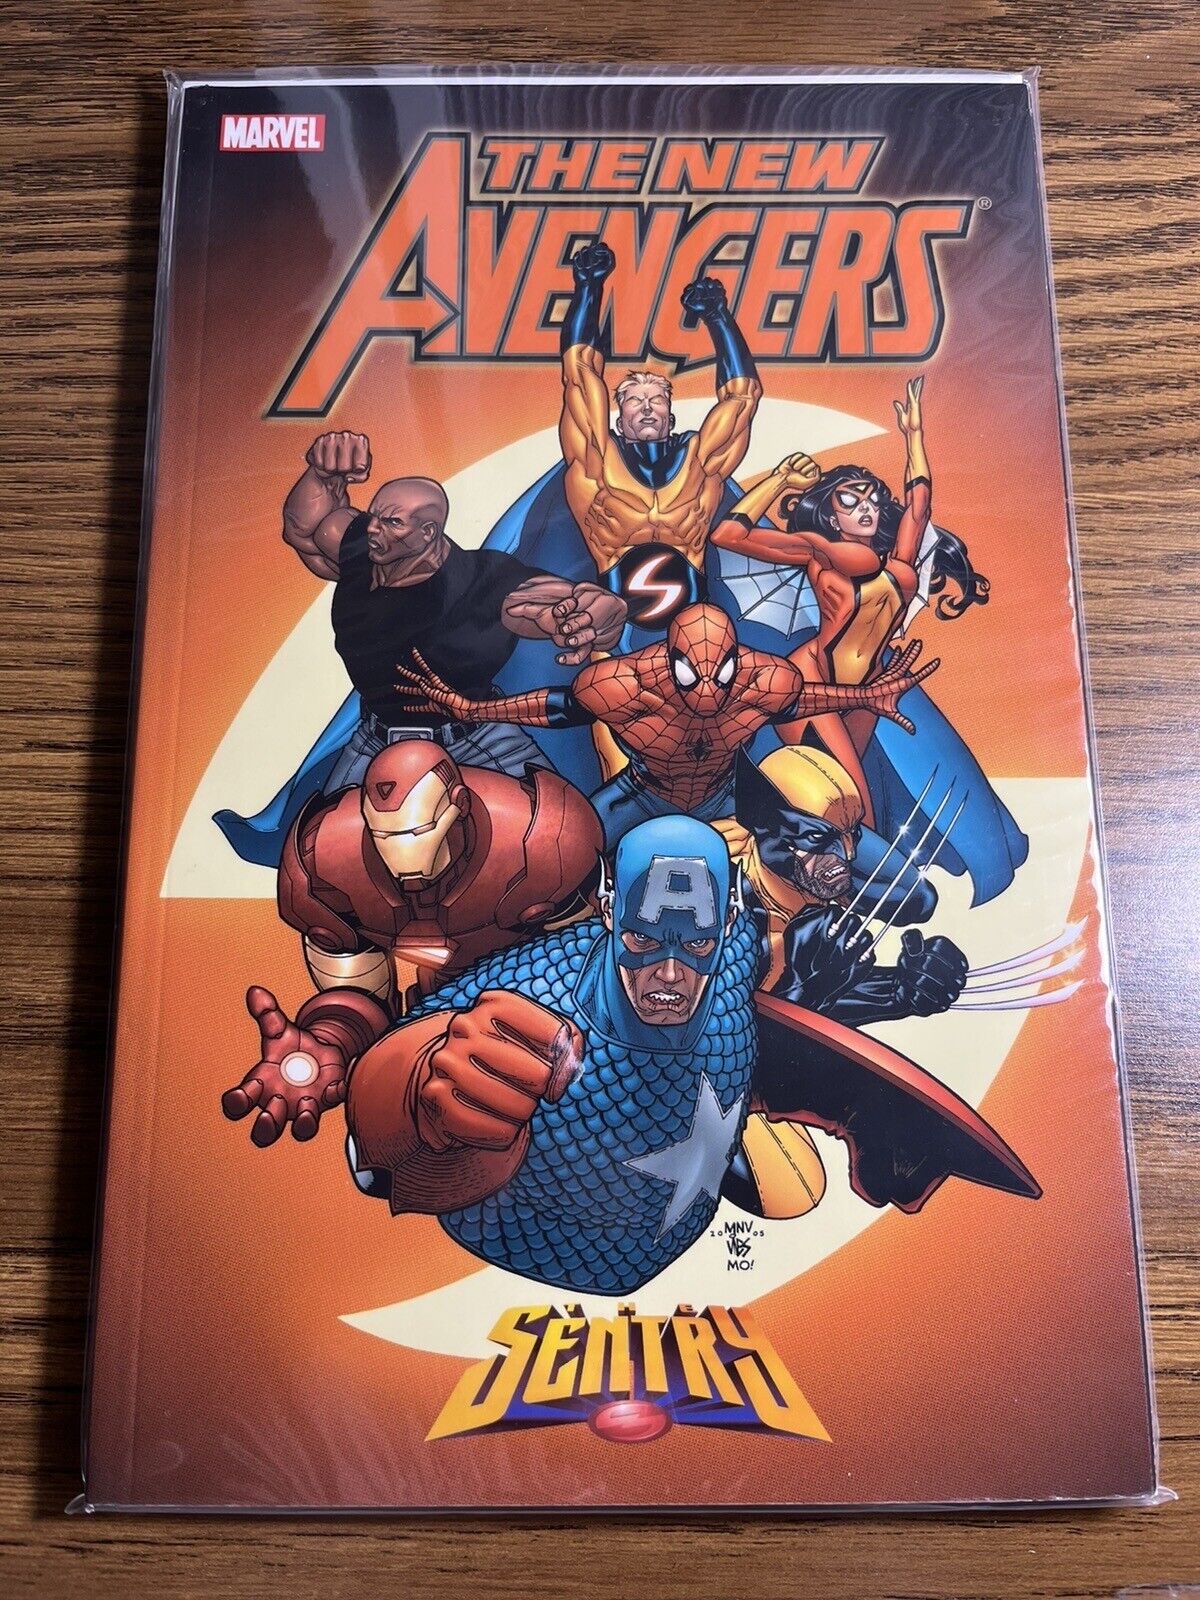 NEW AVENGERS 2 TRADE PAPERBACK BENDIS STORY MCNIVEN COVER MARVEL 2006 UNREAD